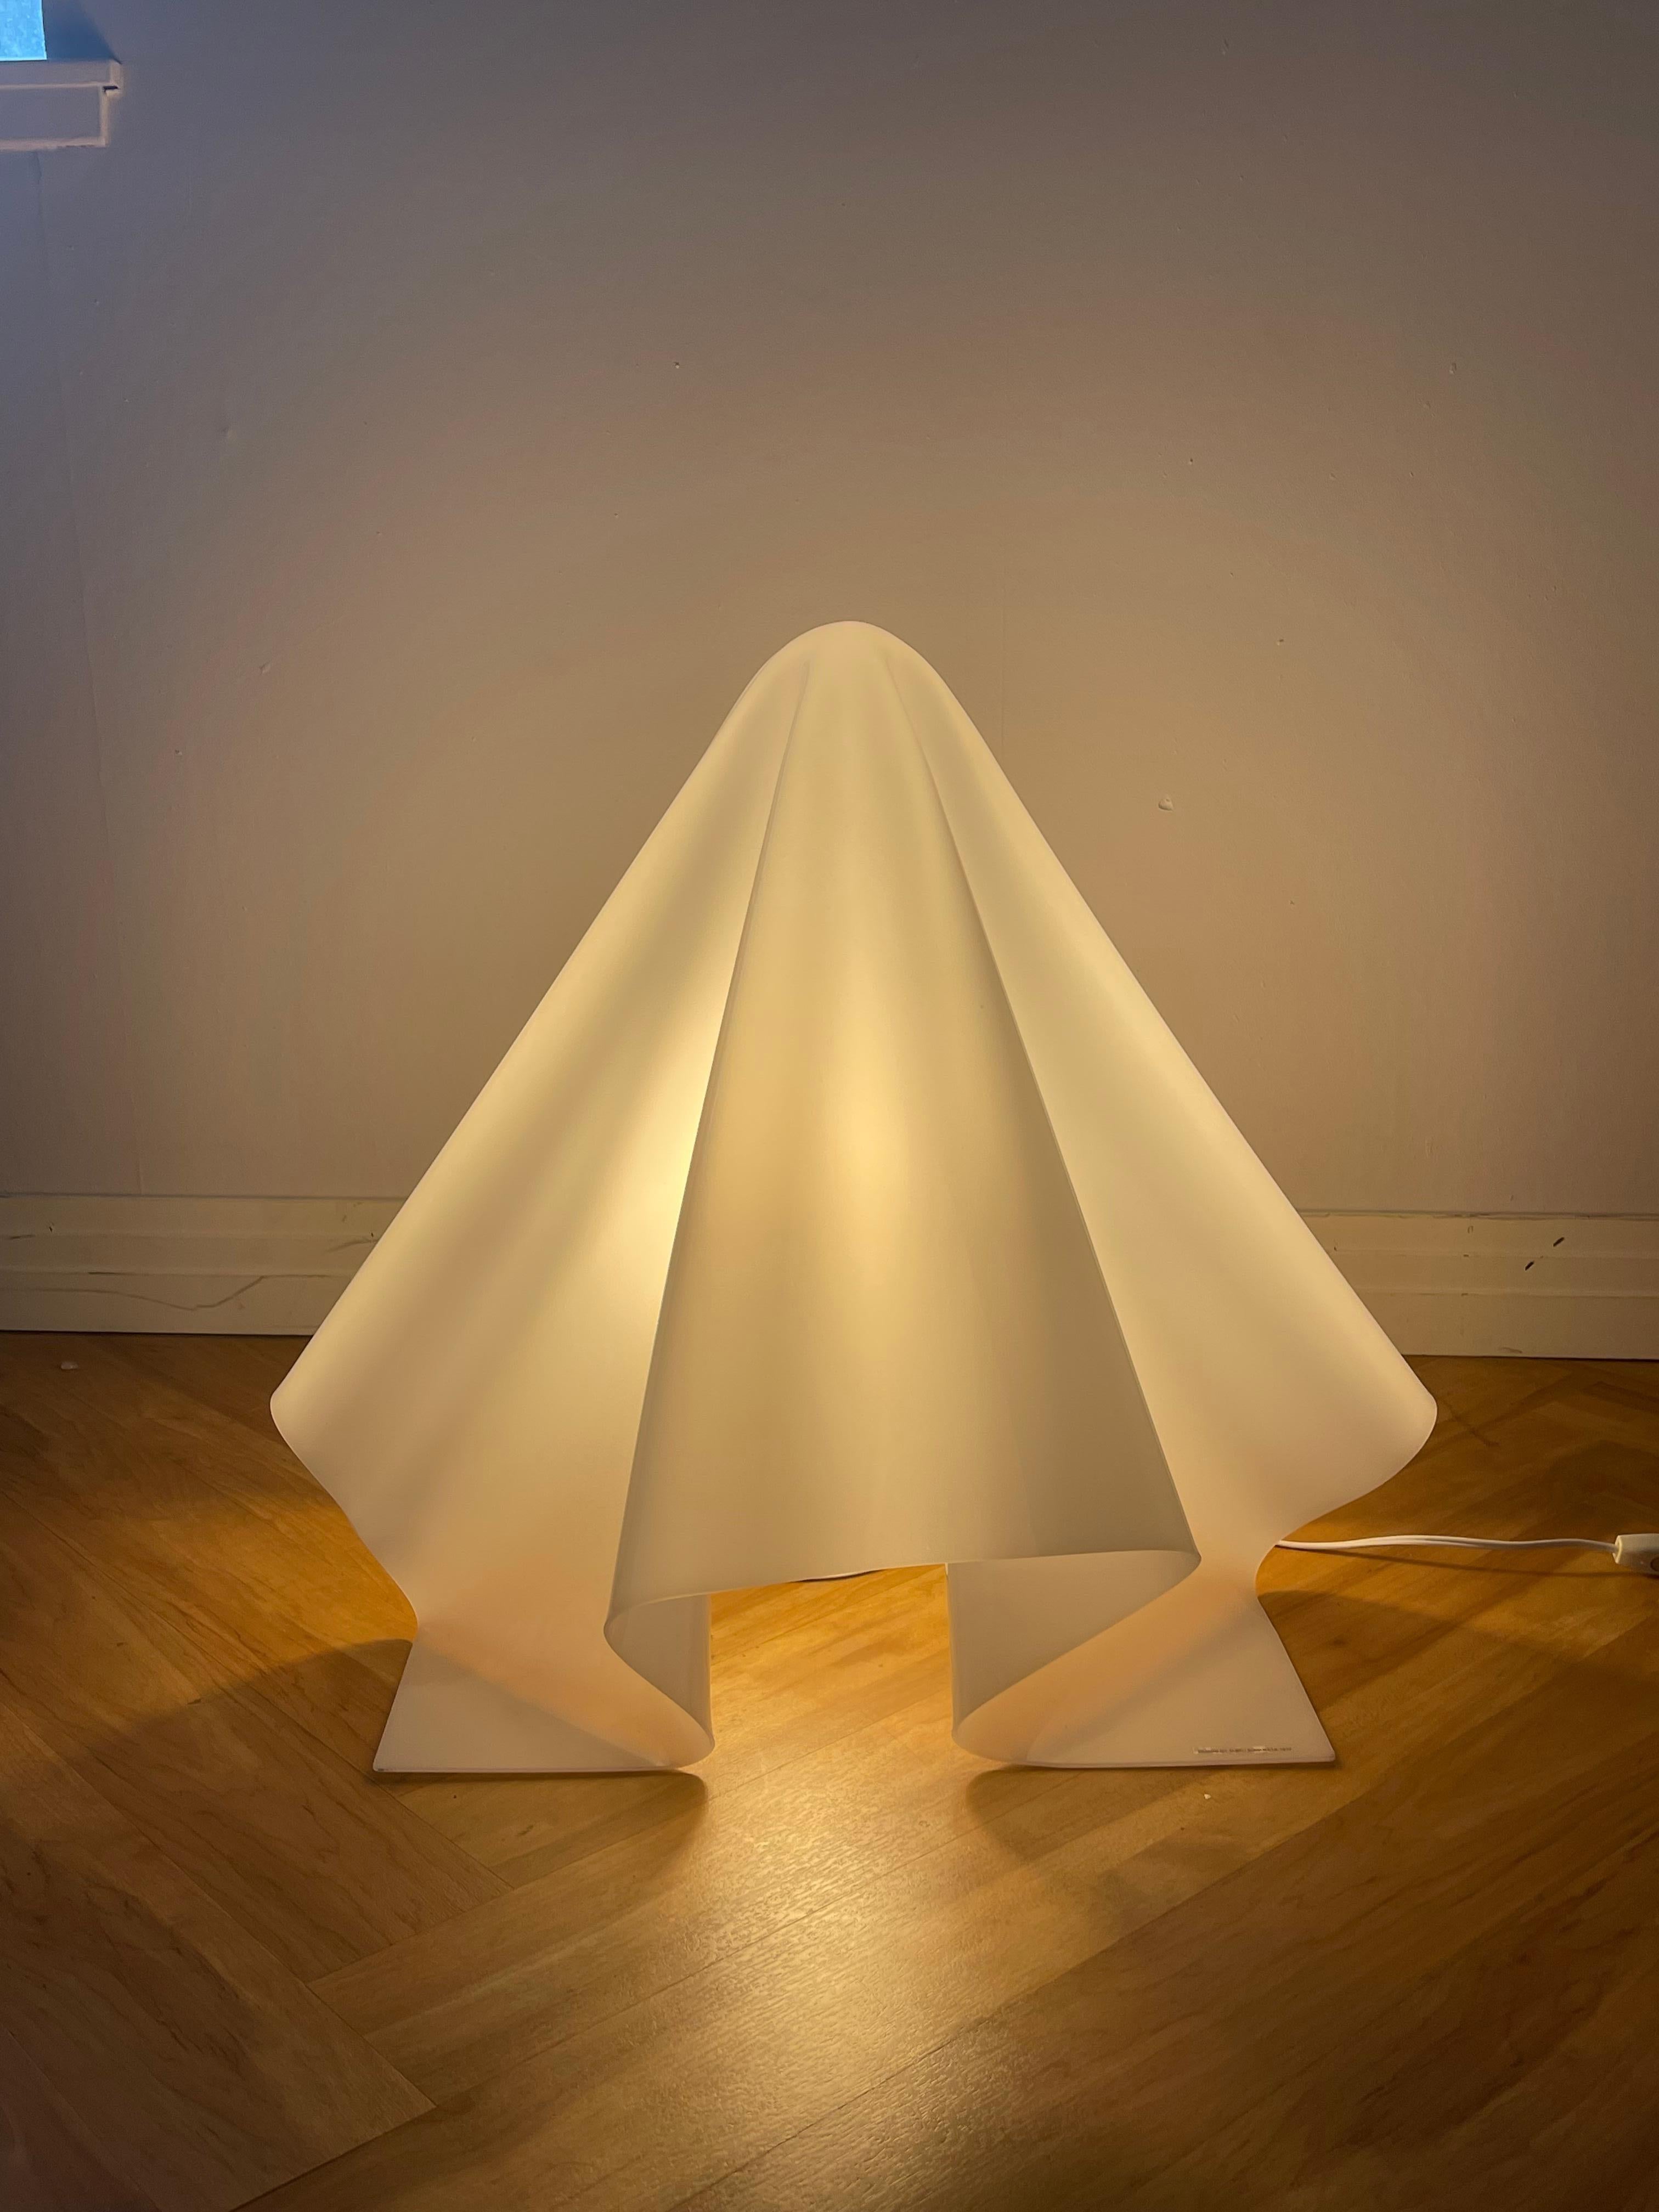 Large Oba-Q K series floor lamp by Shiro Kuramata. White acrylic shade with external light source. Excellent condition. Kuramata, one of the most influential post-modern designers, is one of Japan’s most sought after for collectors.